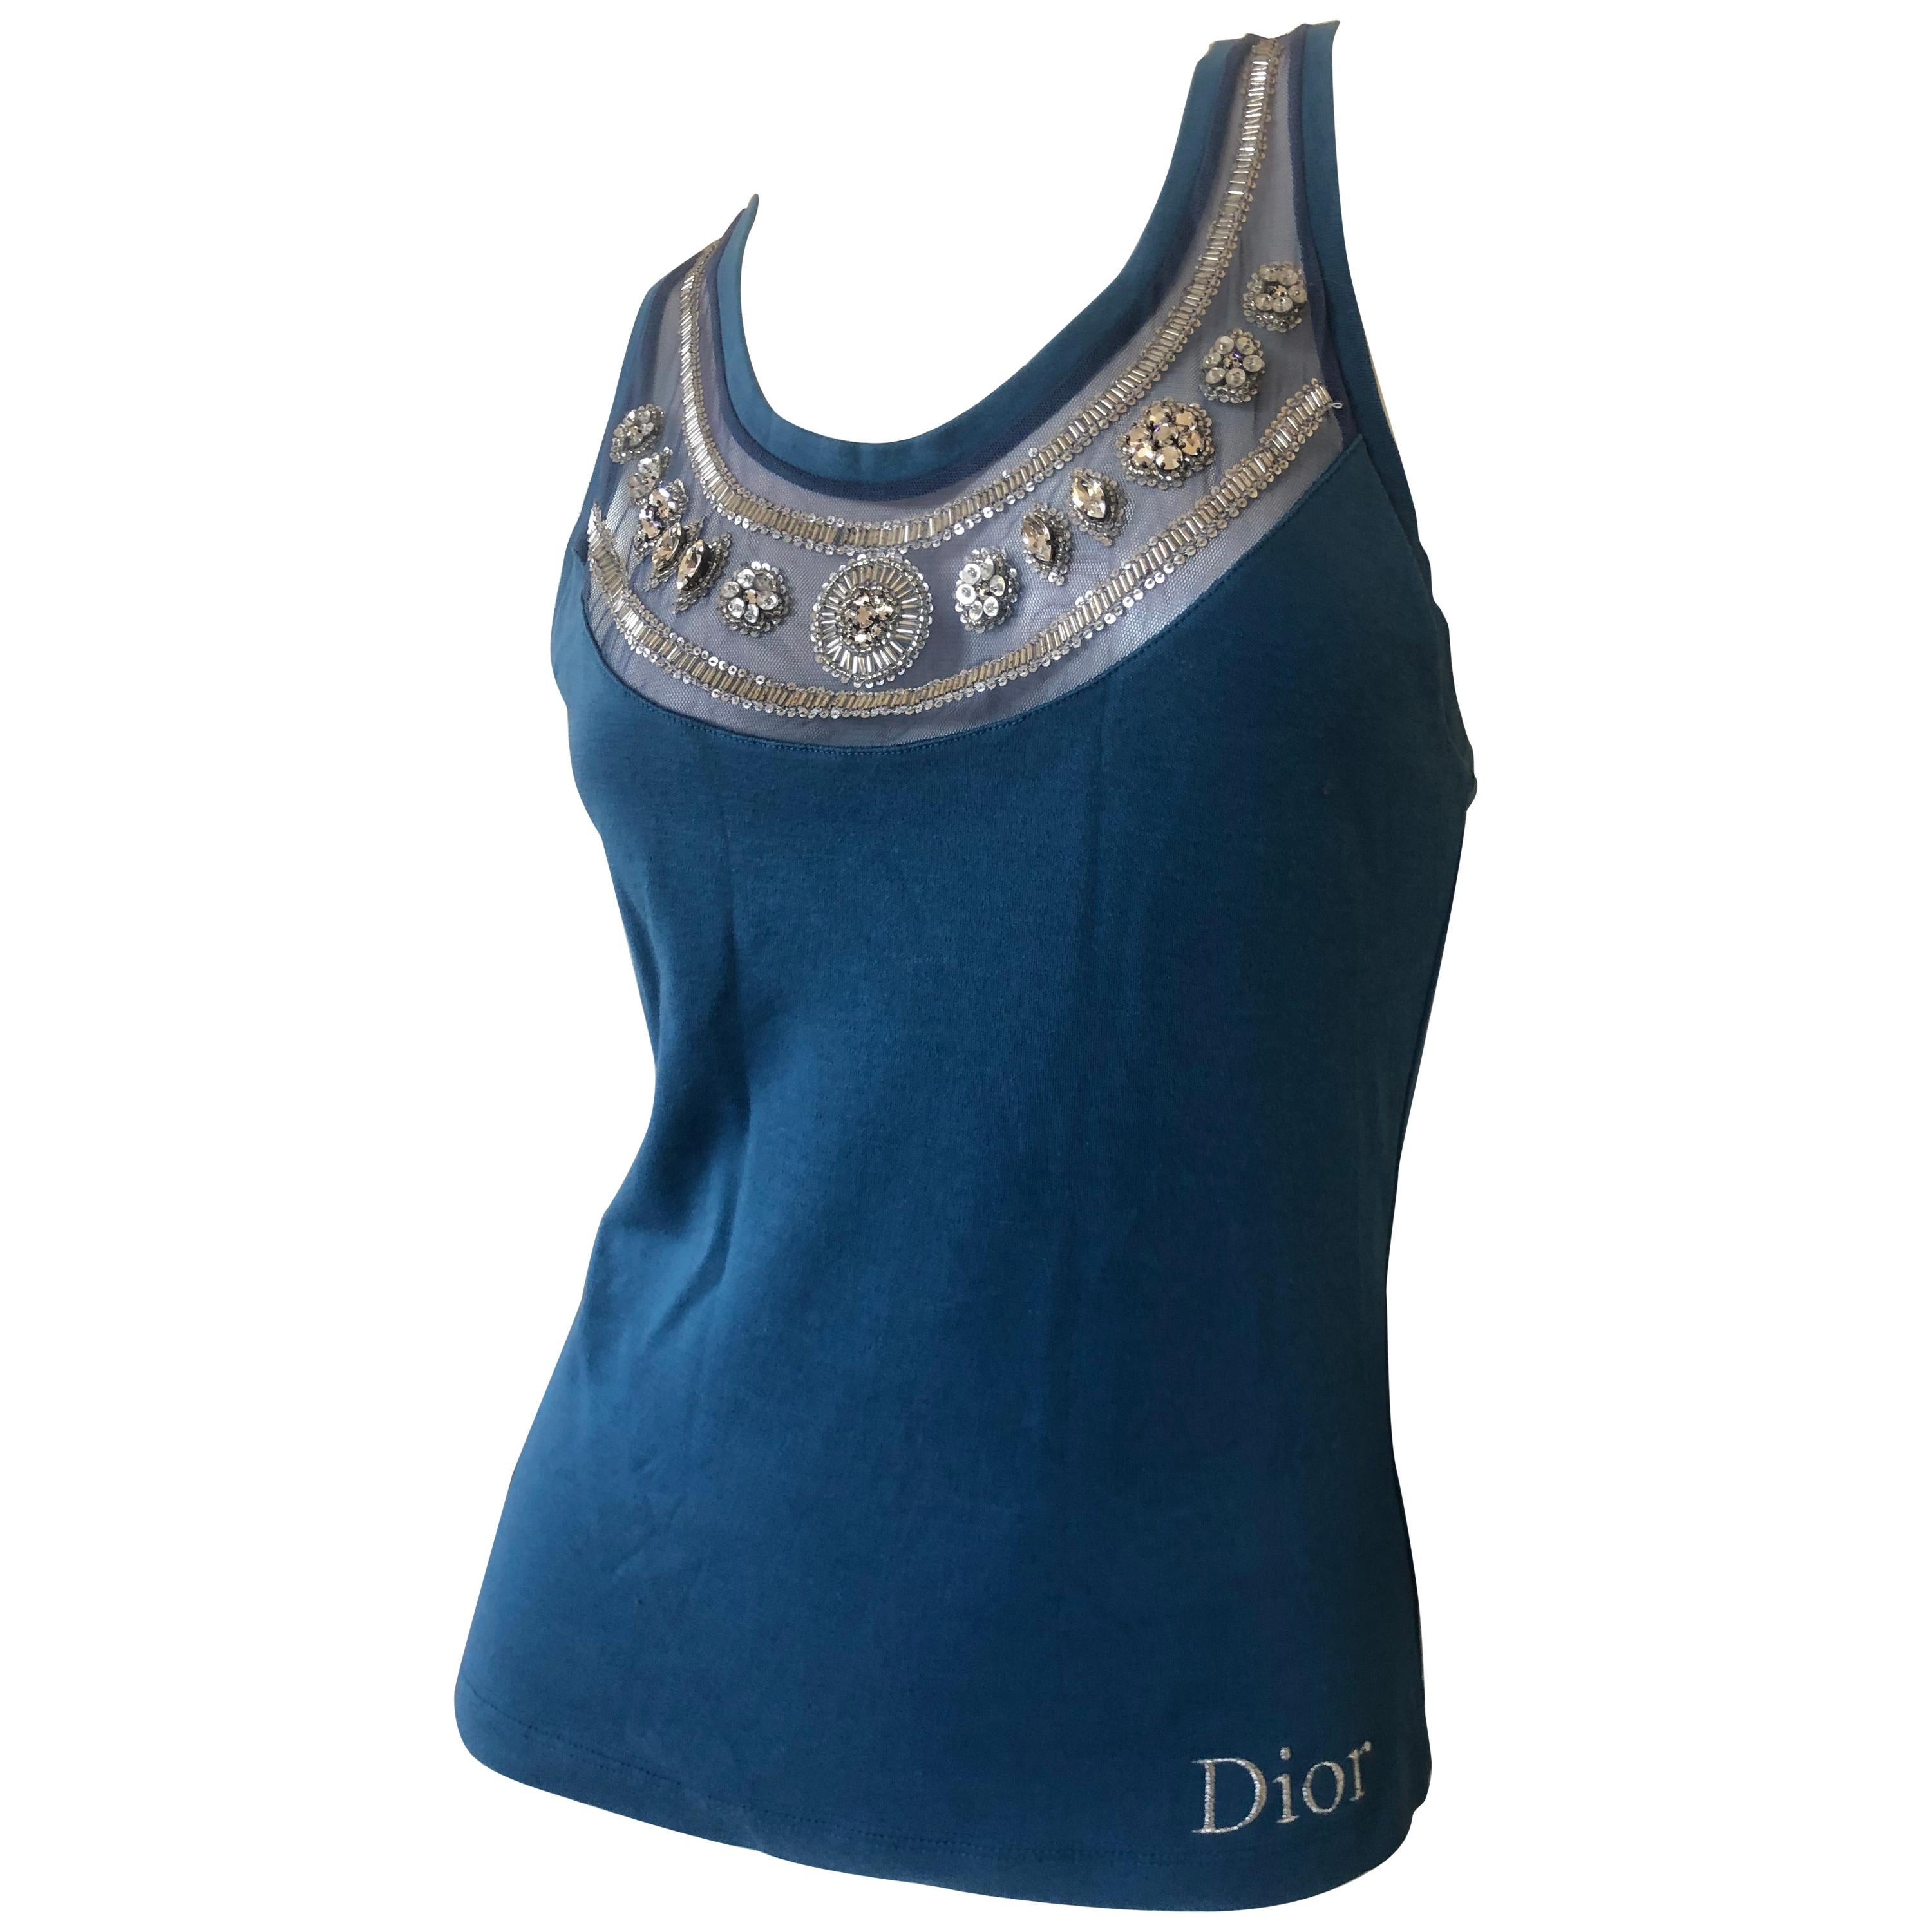 Christian Dior Crystal Embellished Evening Top by John Galliano For Sale